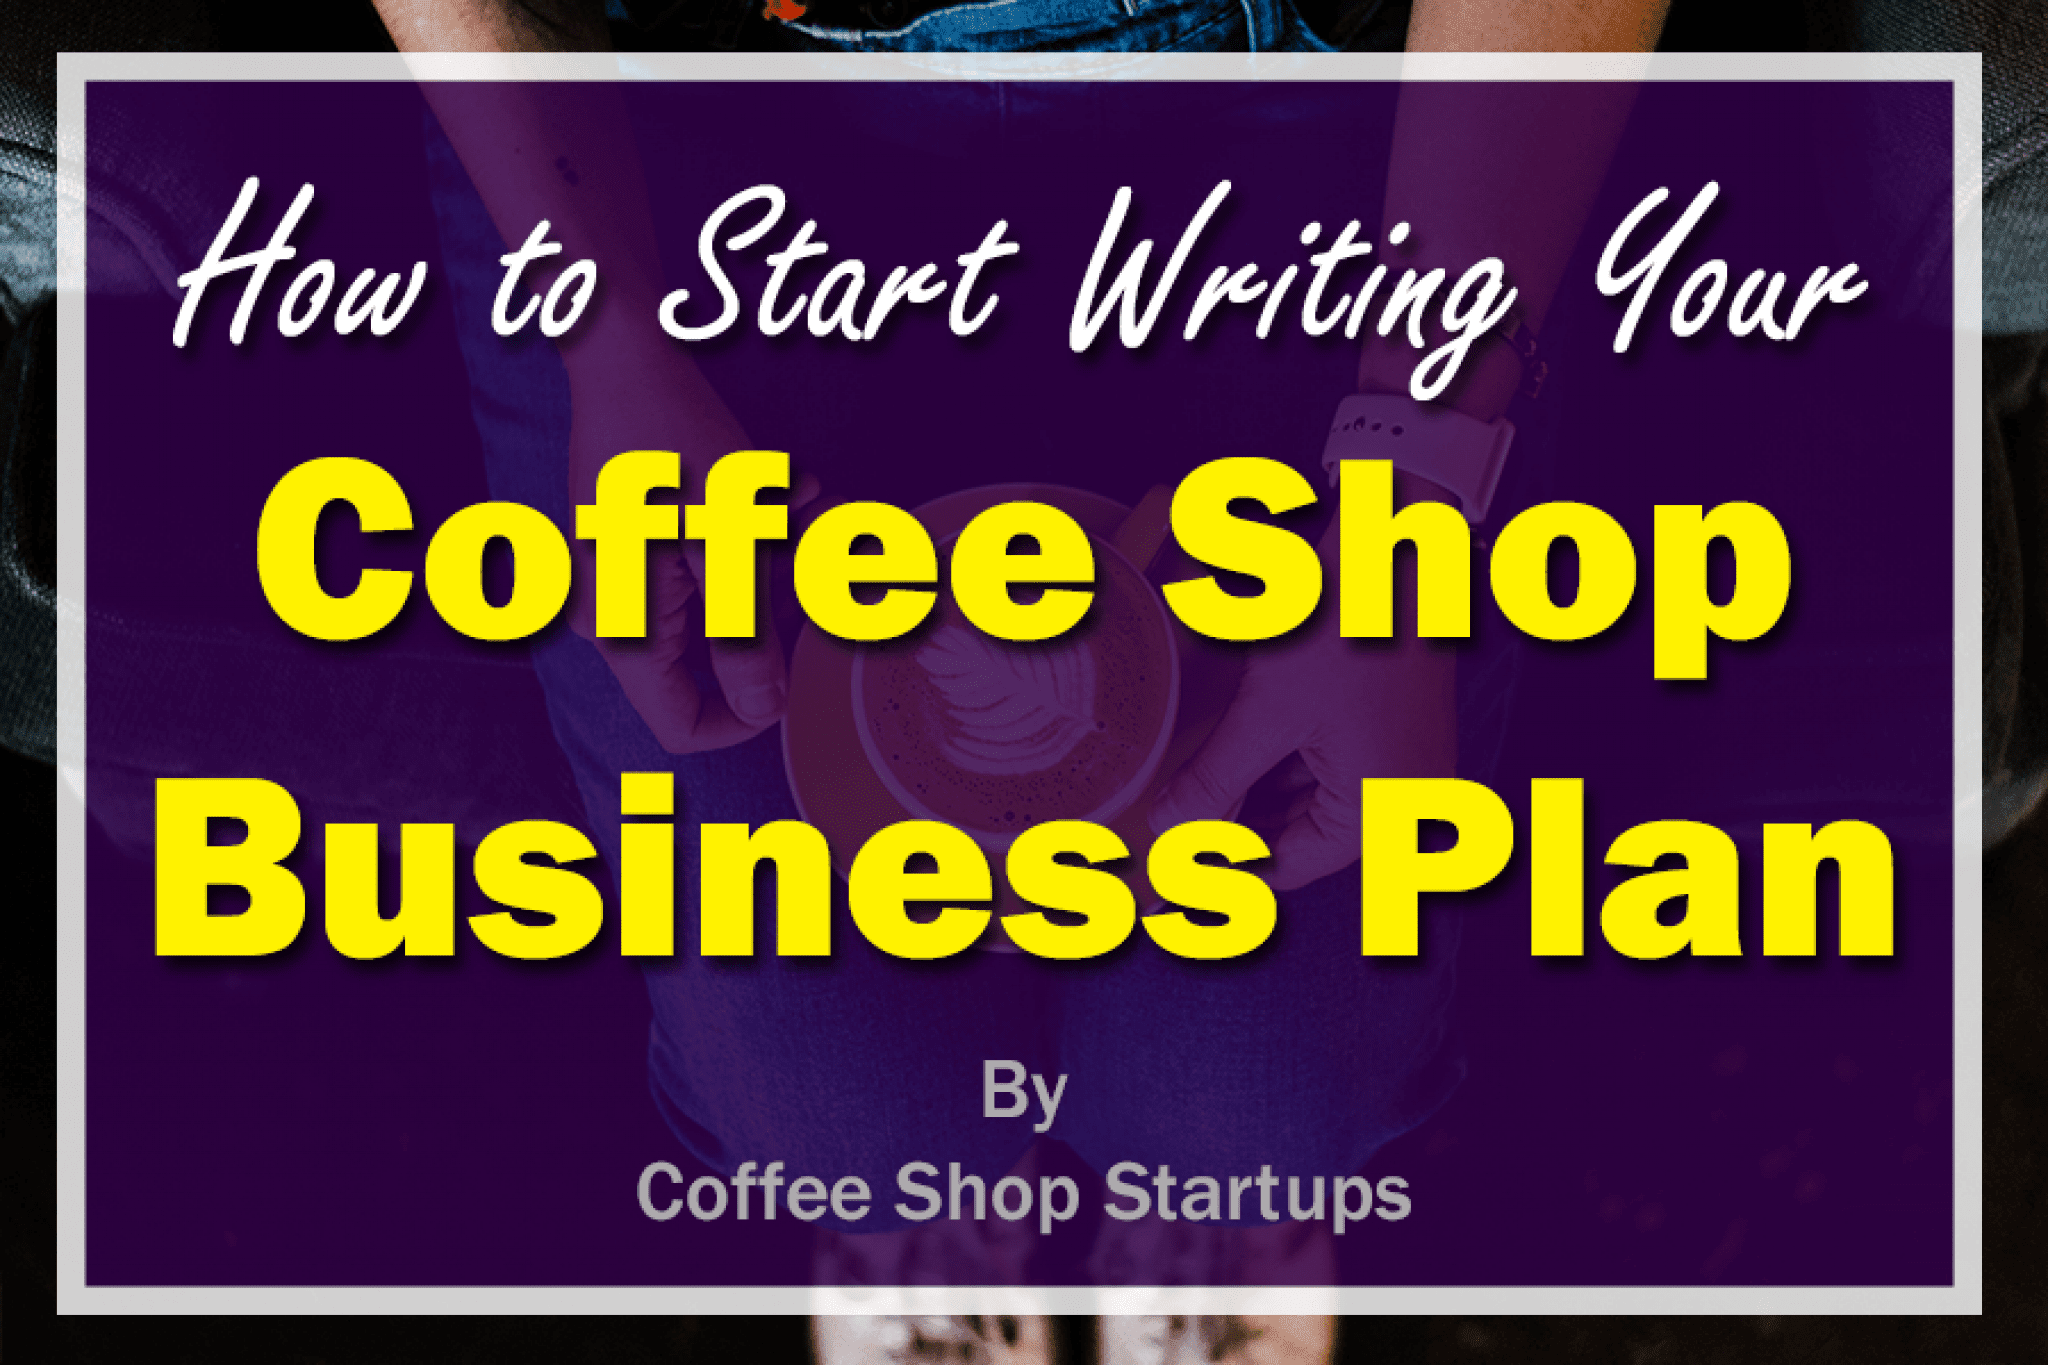 what is the purpose of coffee shop business plan